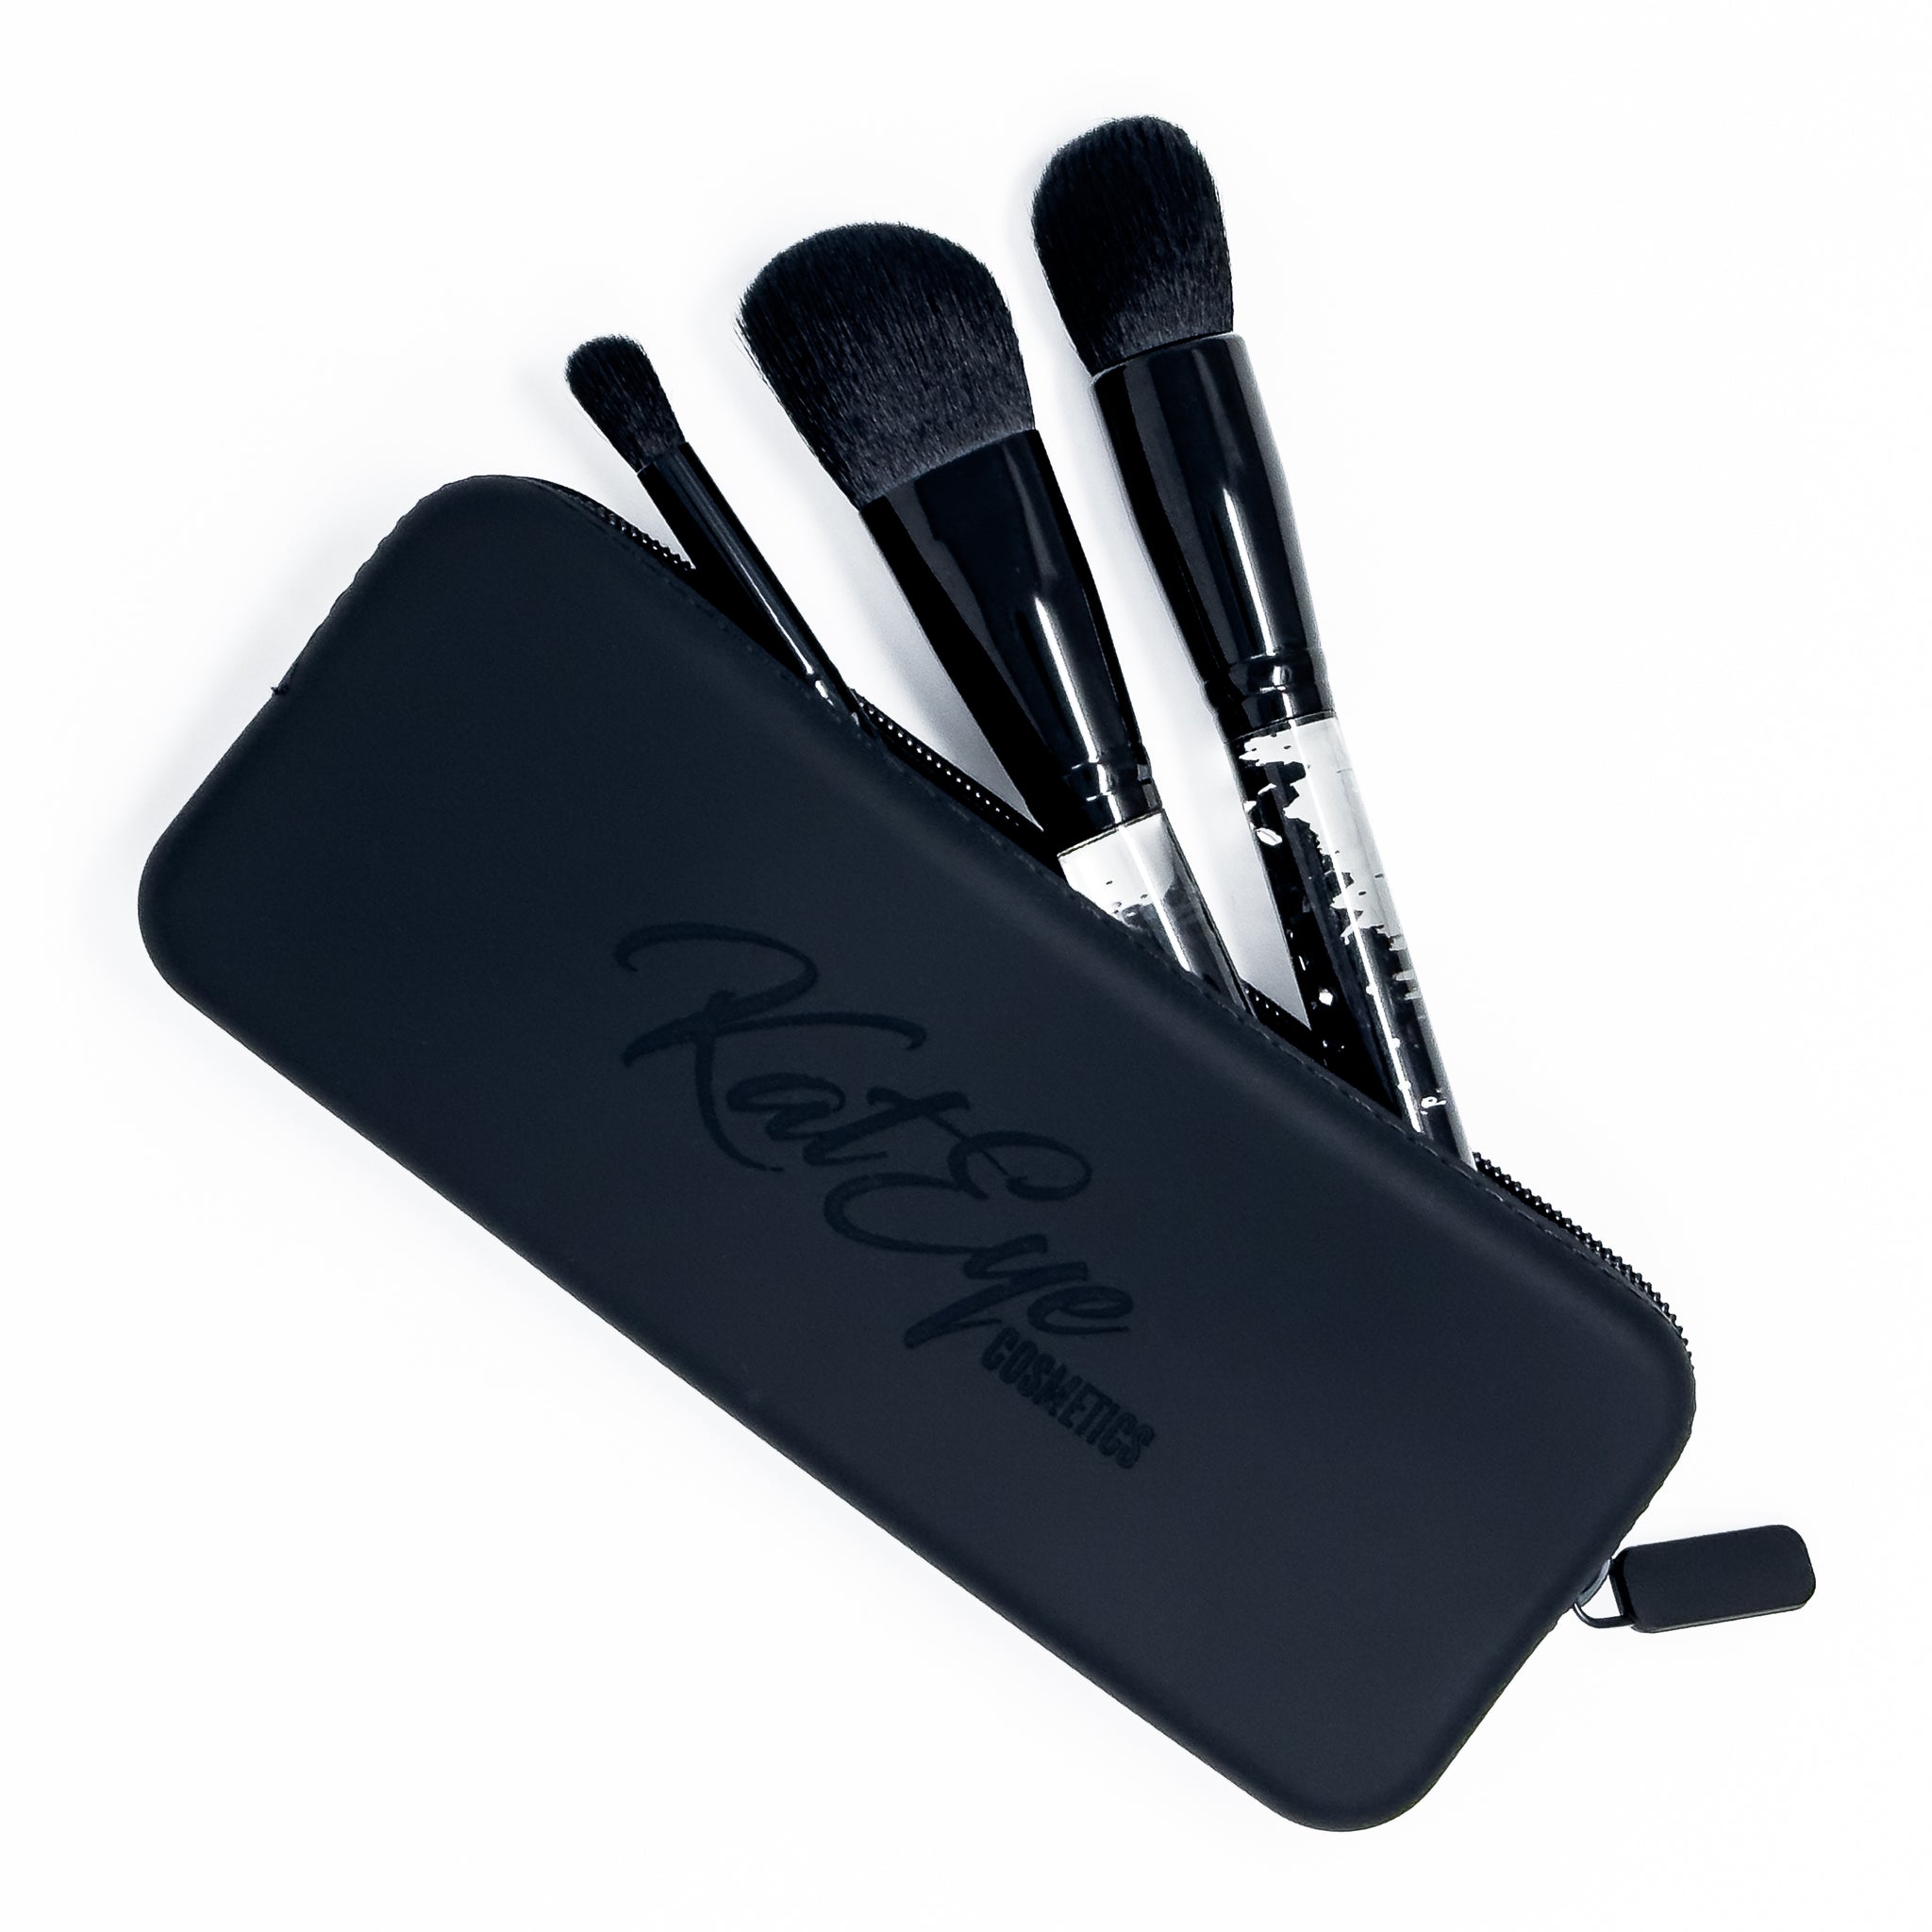 Two Piece Travel Brush Case